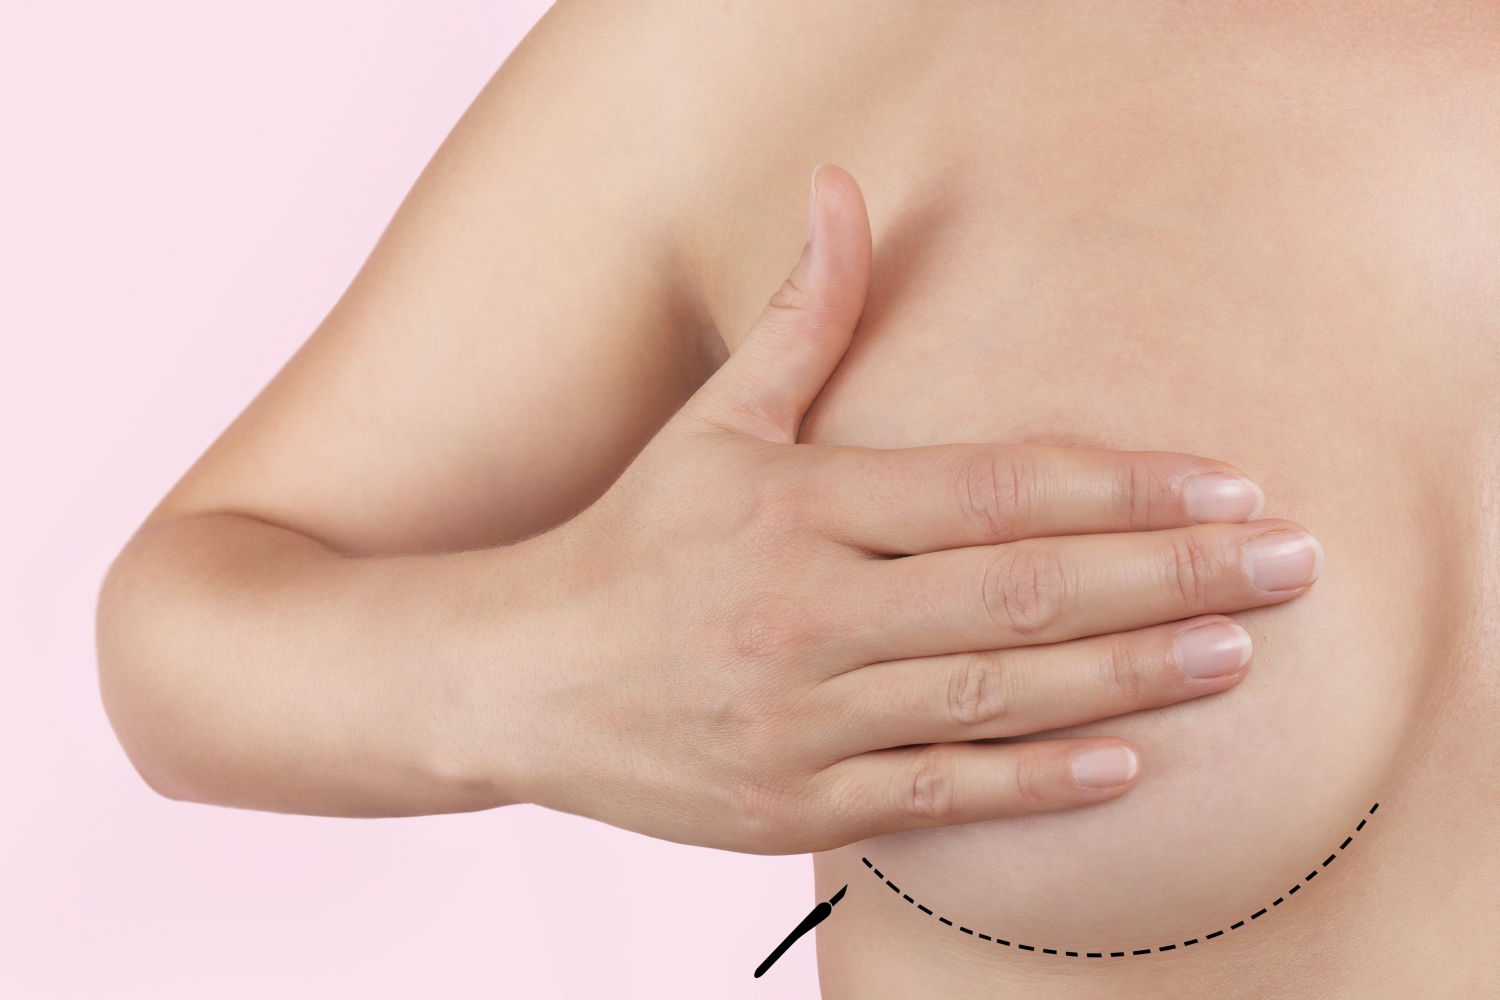 Breast augmentation may leave small scars. The care you take before and after surgery will impact this. Call 864-223-0505 to speak with Dr. Ted Vaughn and learn more. 